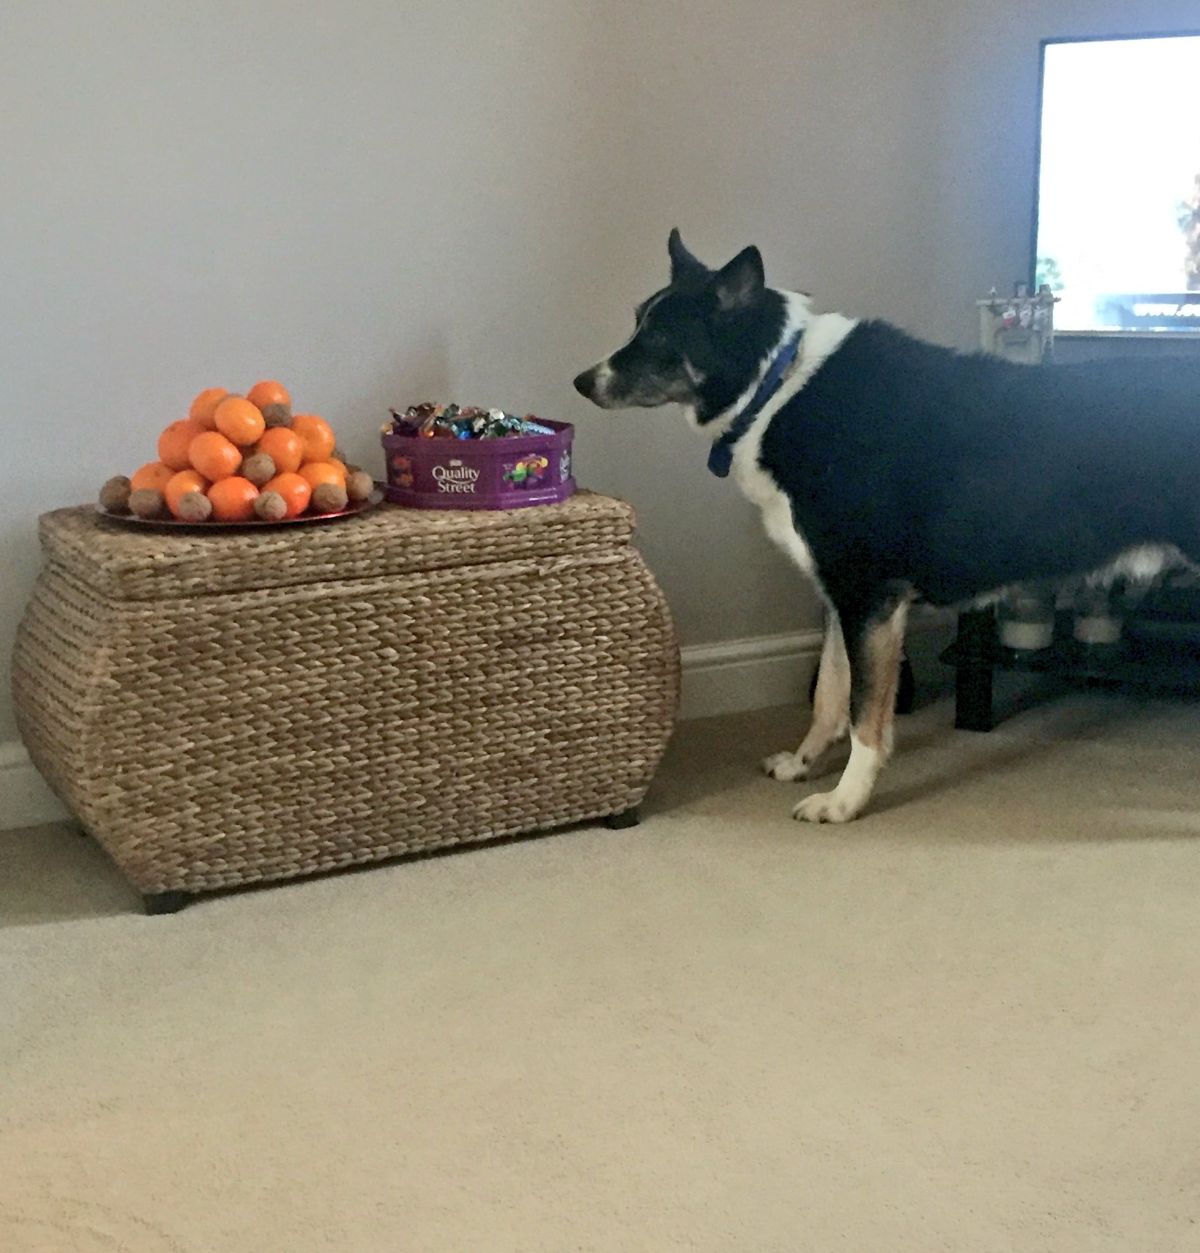 black and white standing next to a wicker chest that has a plate of orange clementines and a purple box of sweets and staring at the fruit